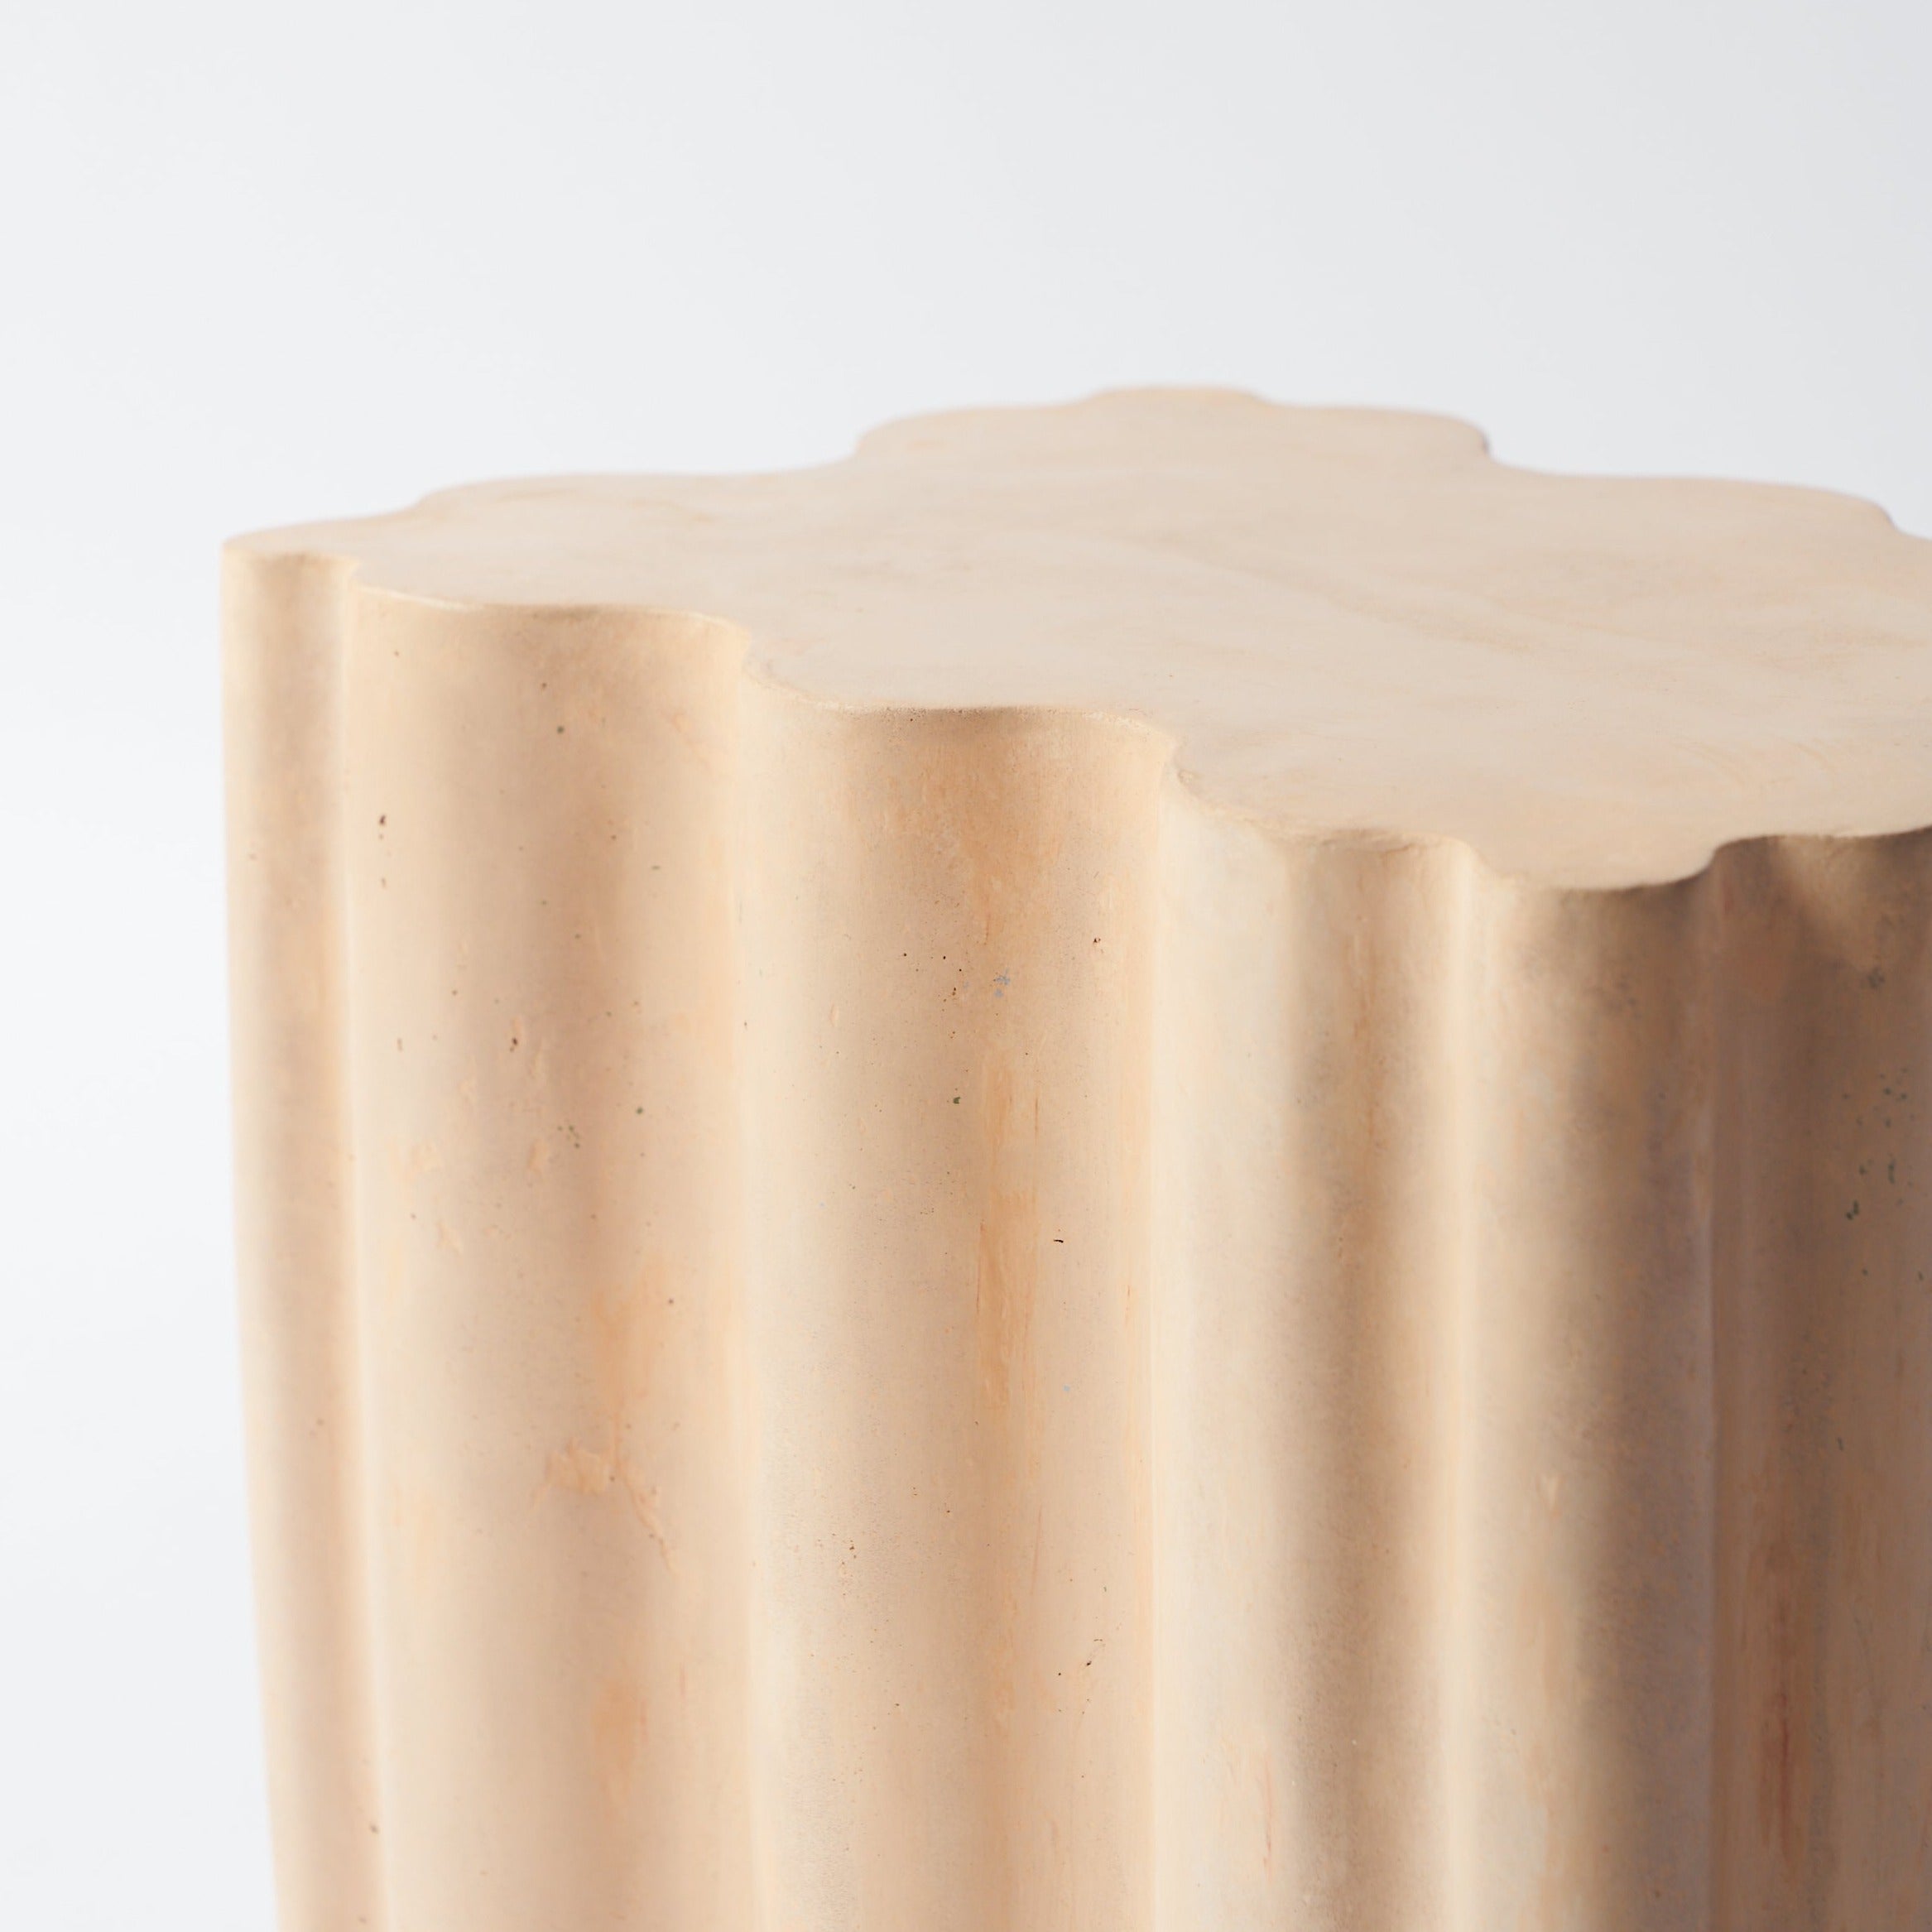 The Cloud Monolith Side Table